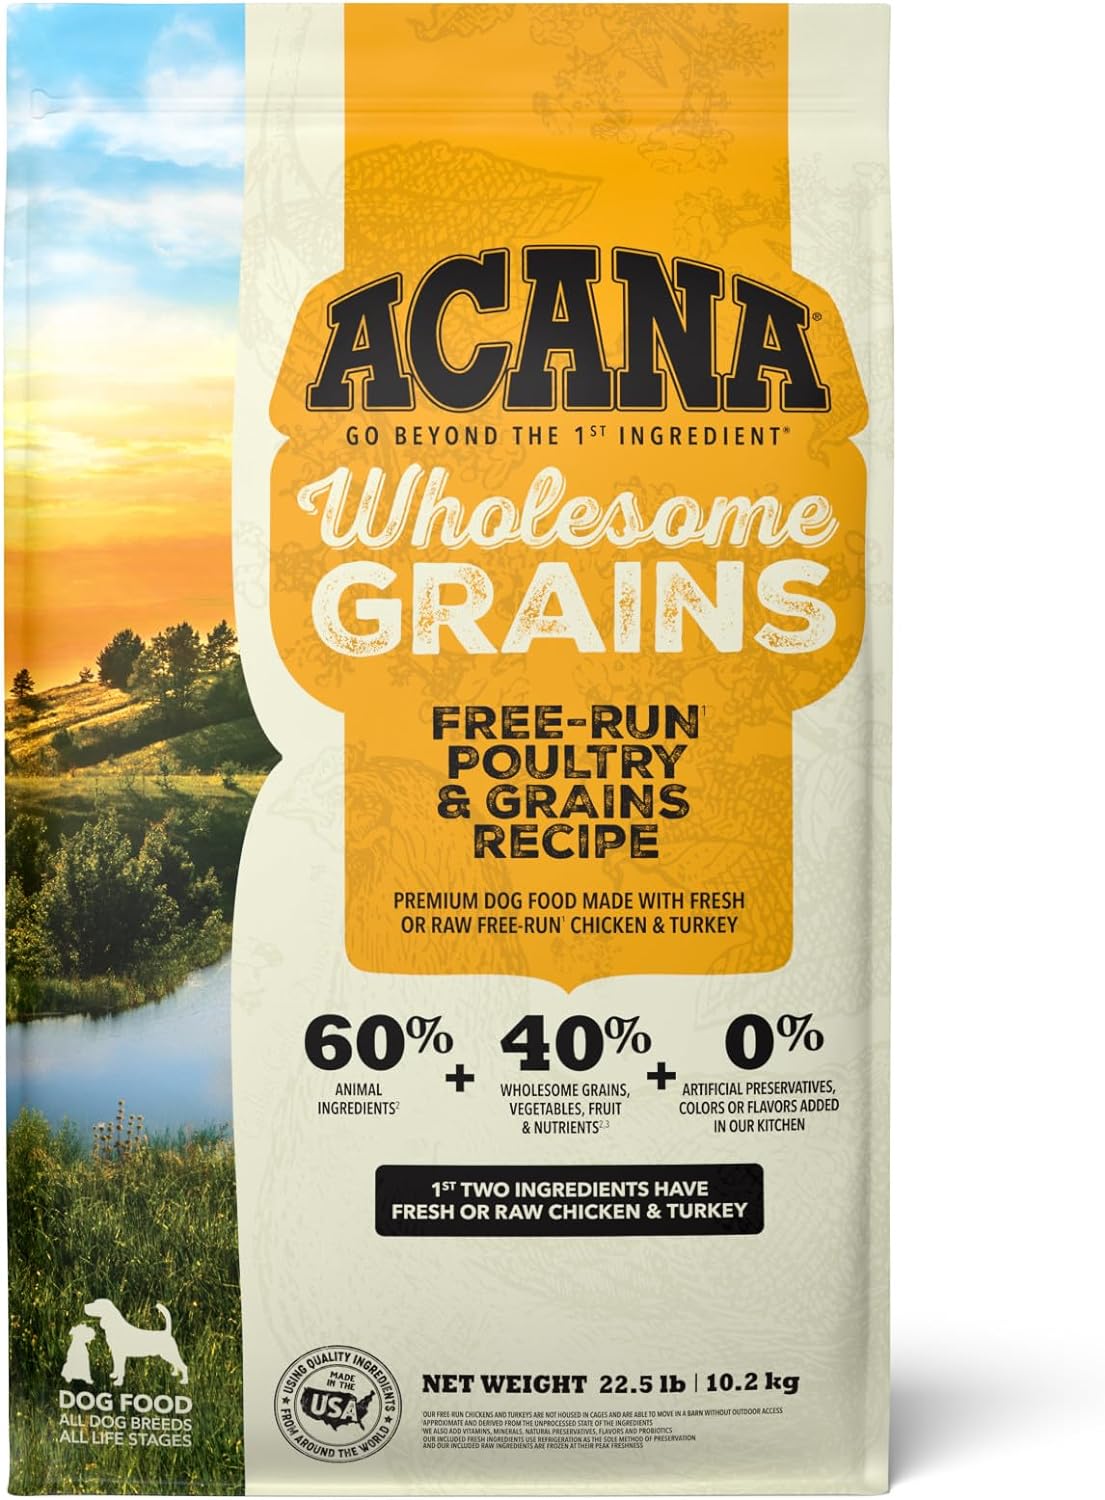 Acana Free-Run Poultry Recipe with Wholesome Grains Dry Dog Food – Gallery Image 1